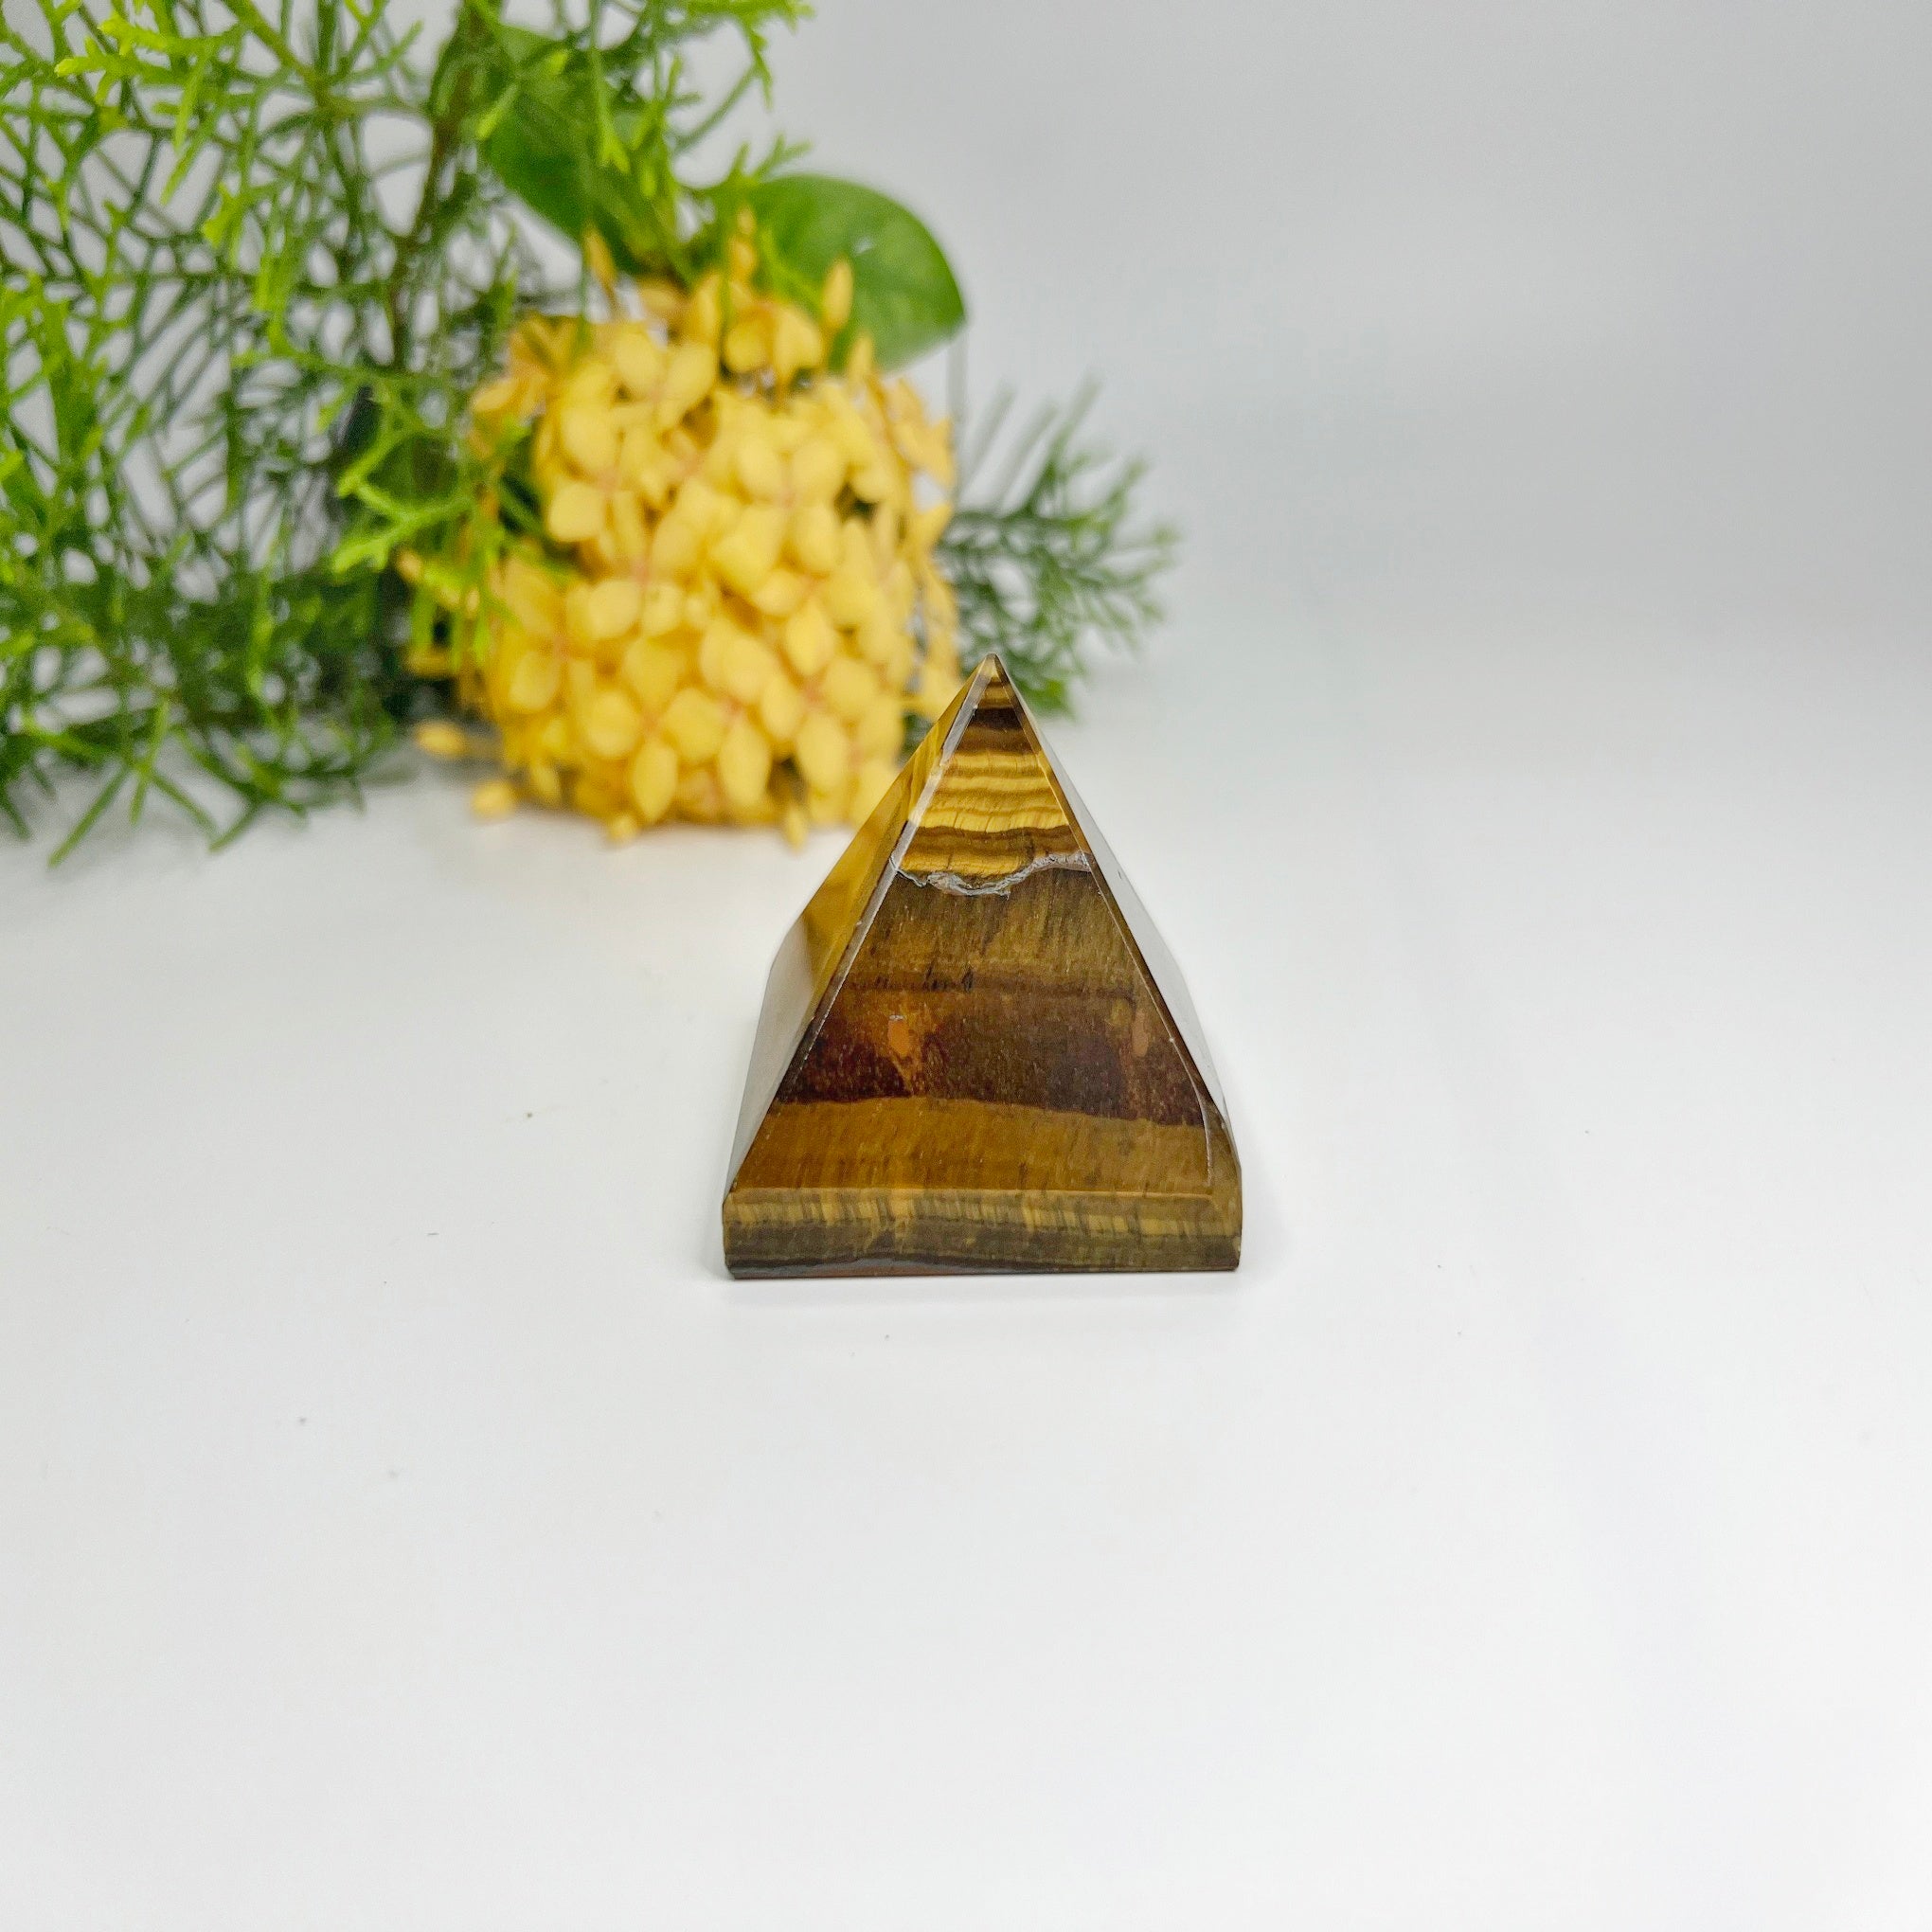 CERTIFIED TIGER EYE PYRAMID CRYSTAL DARK BROWN BLACK COLOUR MEDITATION HEALING ACCESSORY  HOME OFFICE GIFT